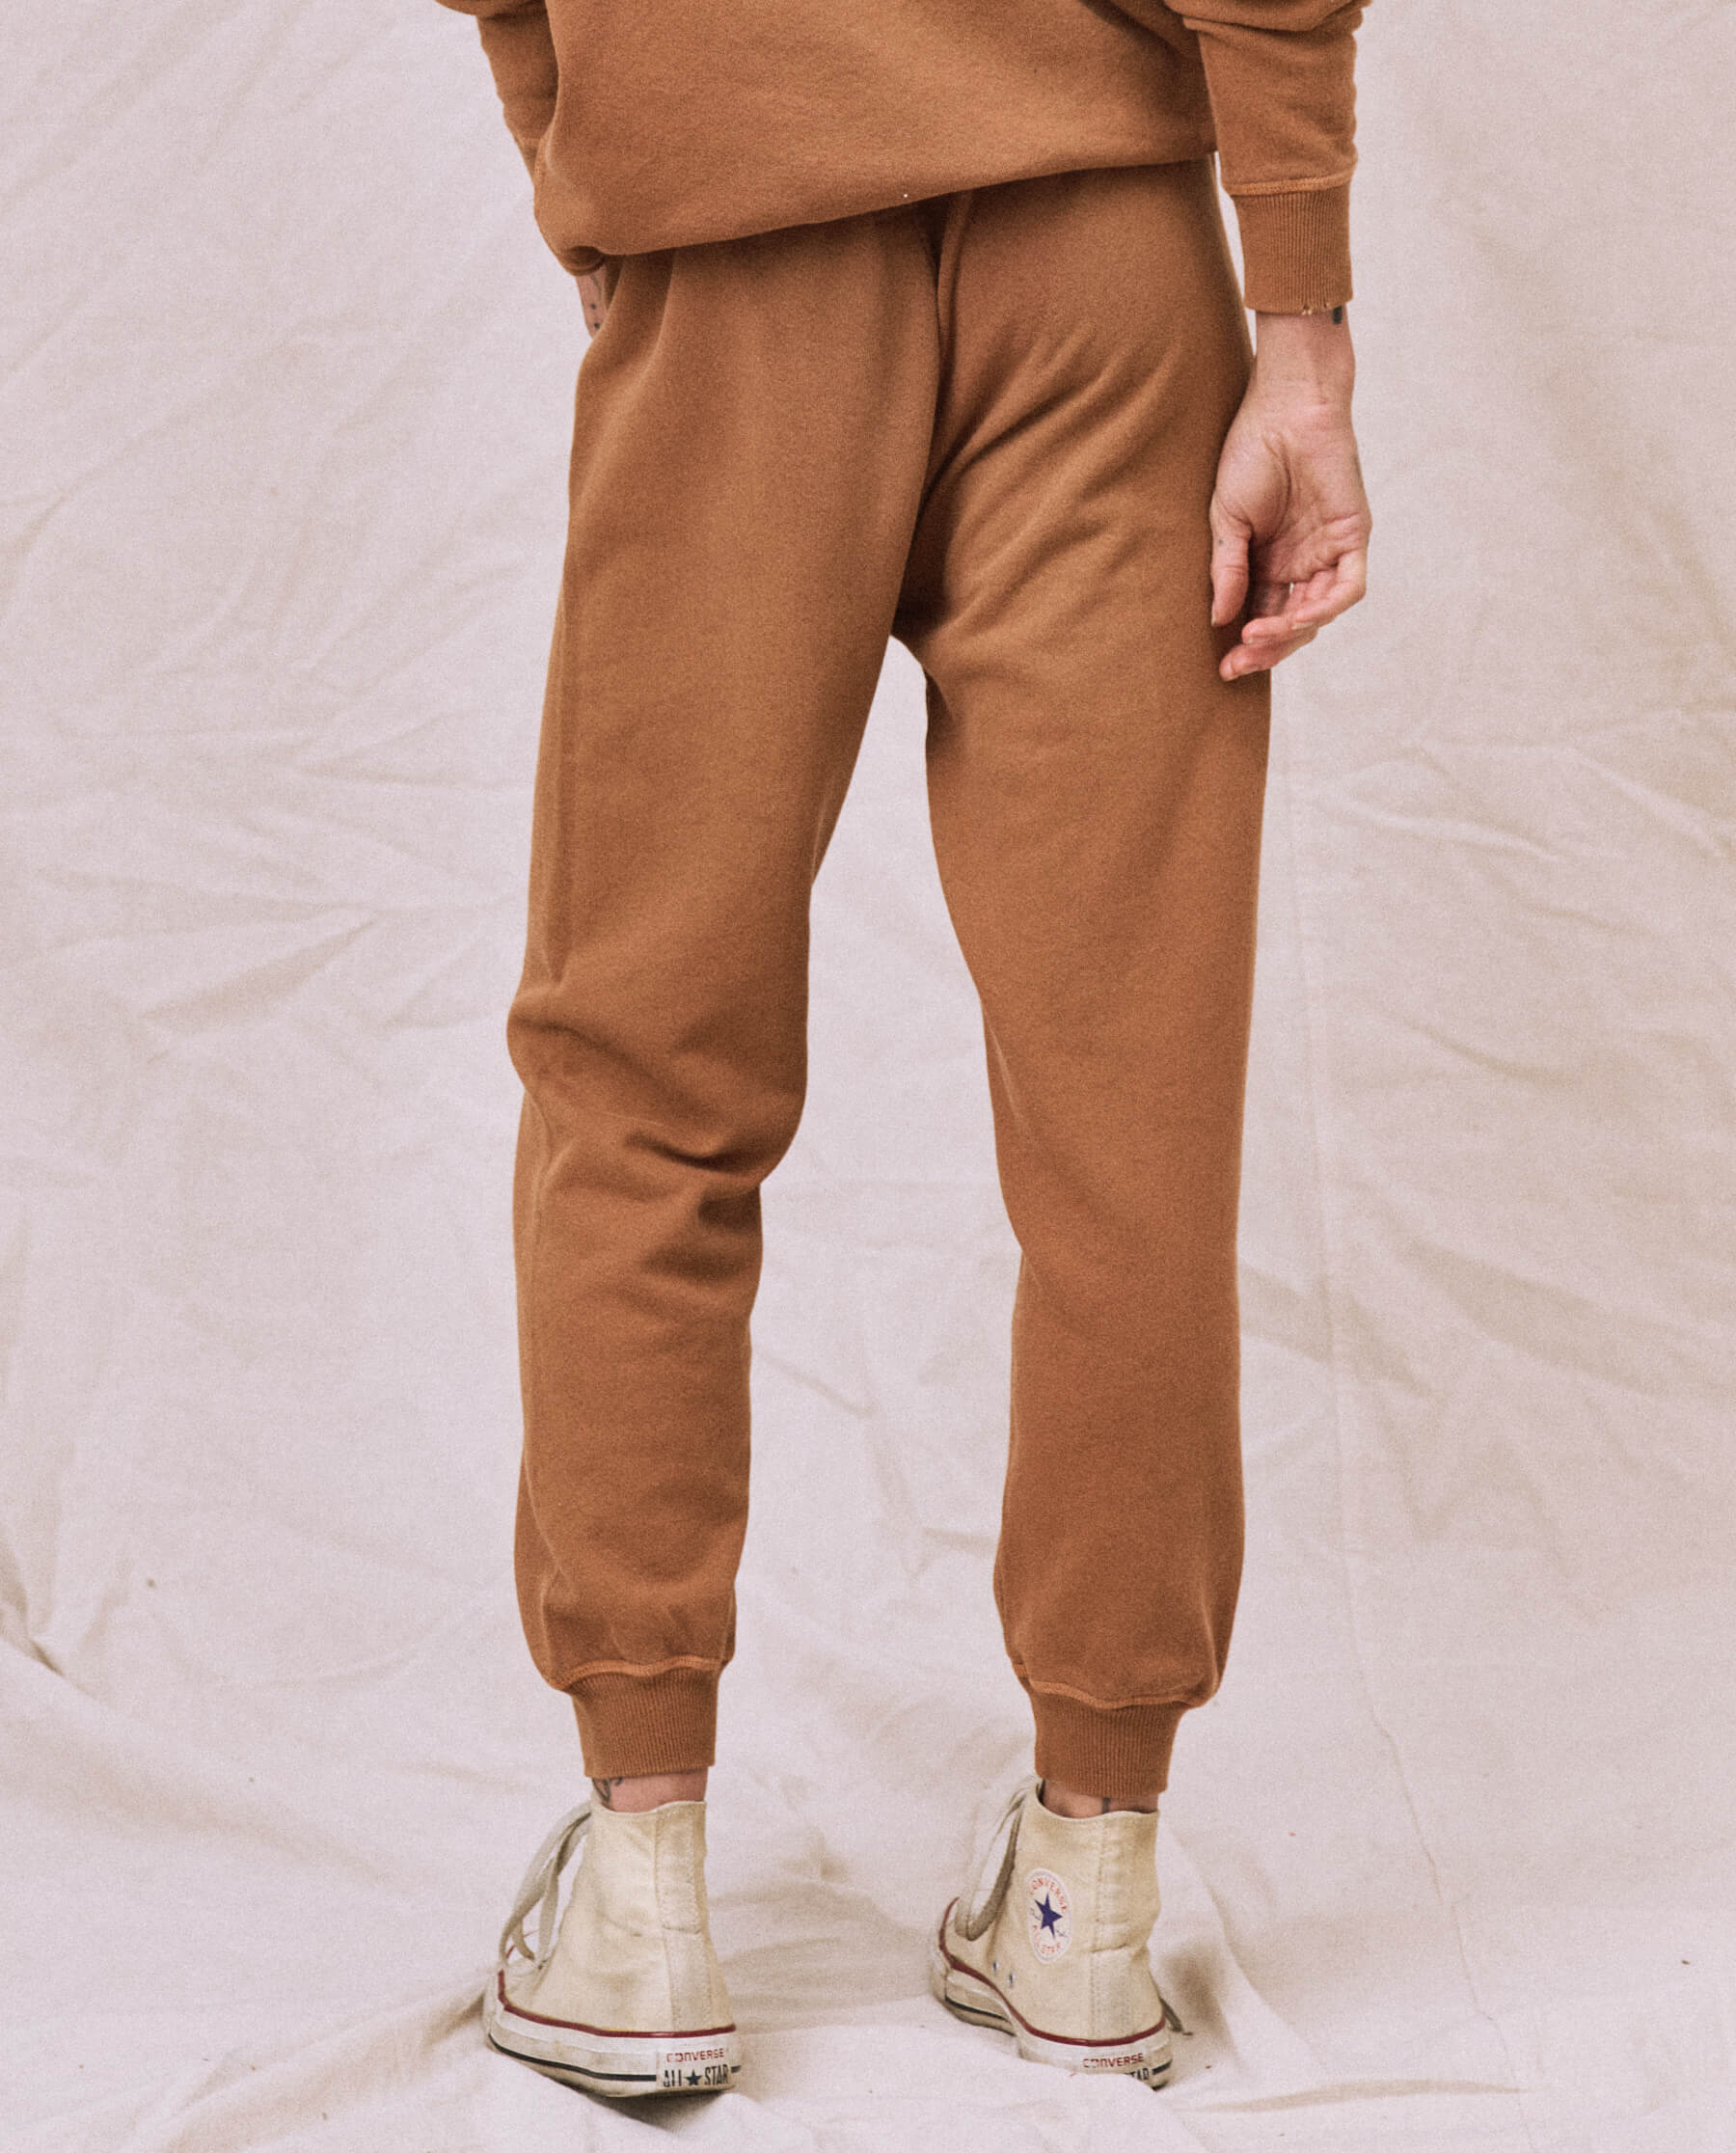 The Cropped Sweatpant. Solid -- Amber